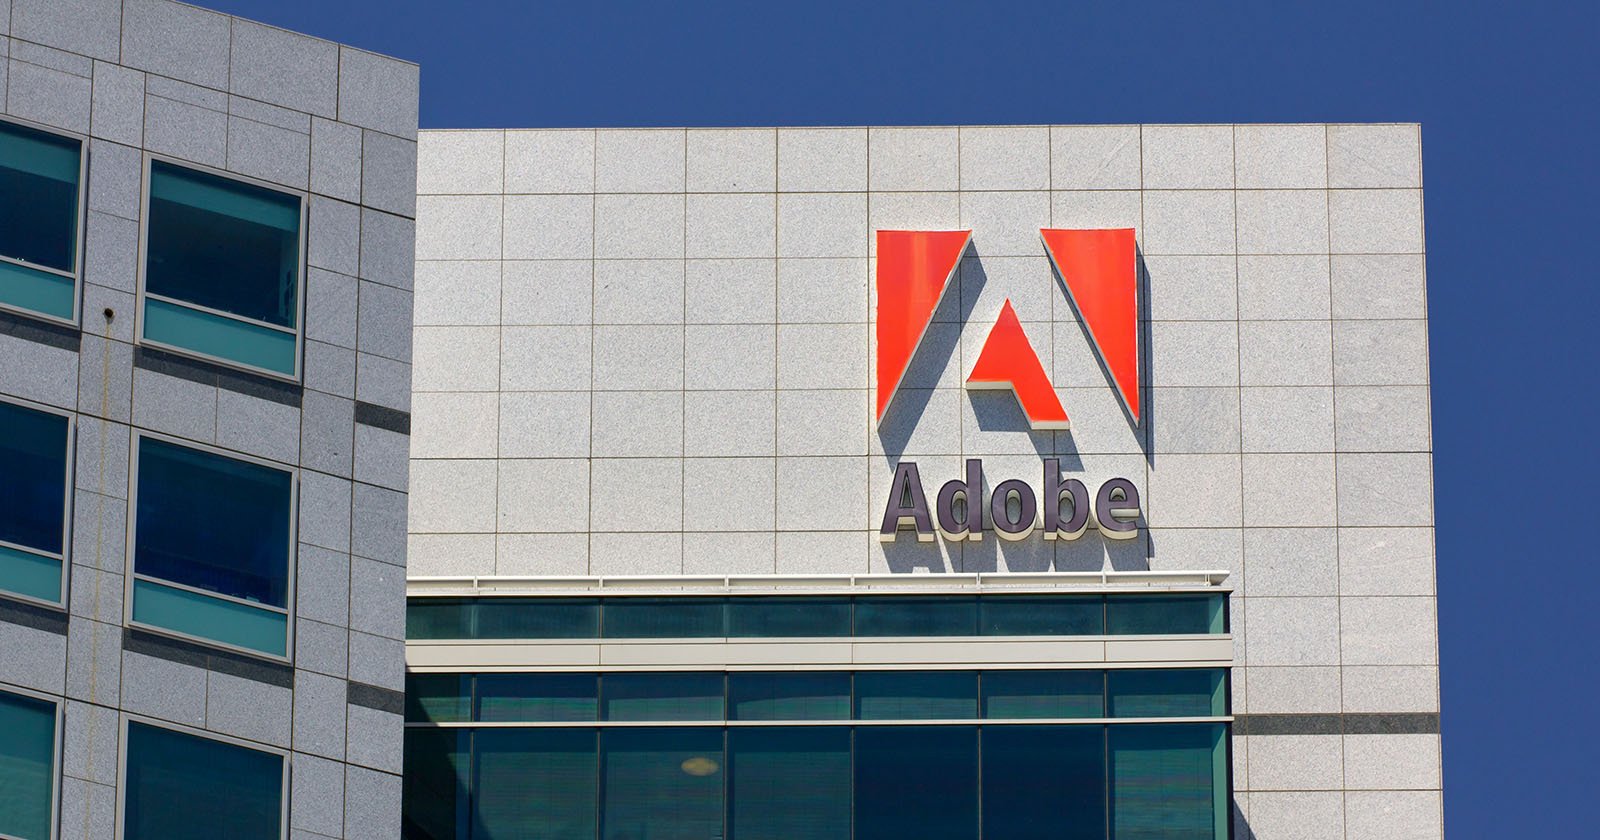 Adobe Records Revenue of $5 Billion in a Single Quarter for the First Time